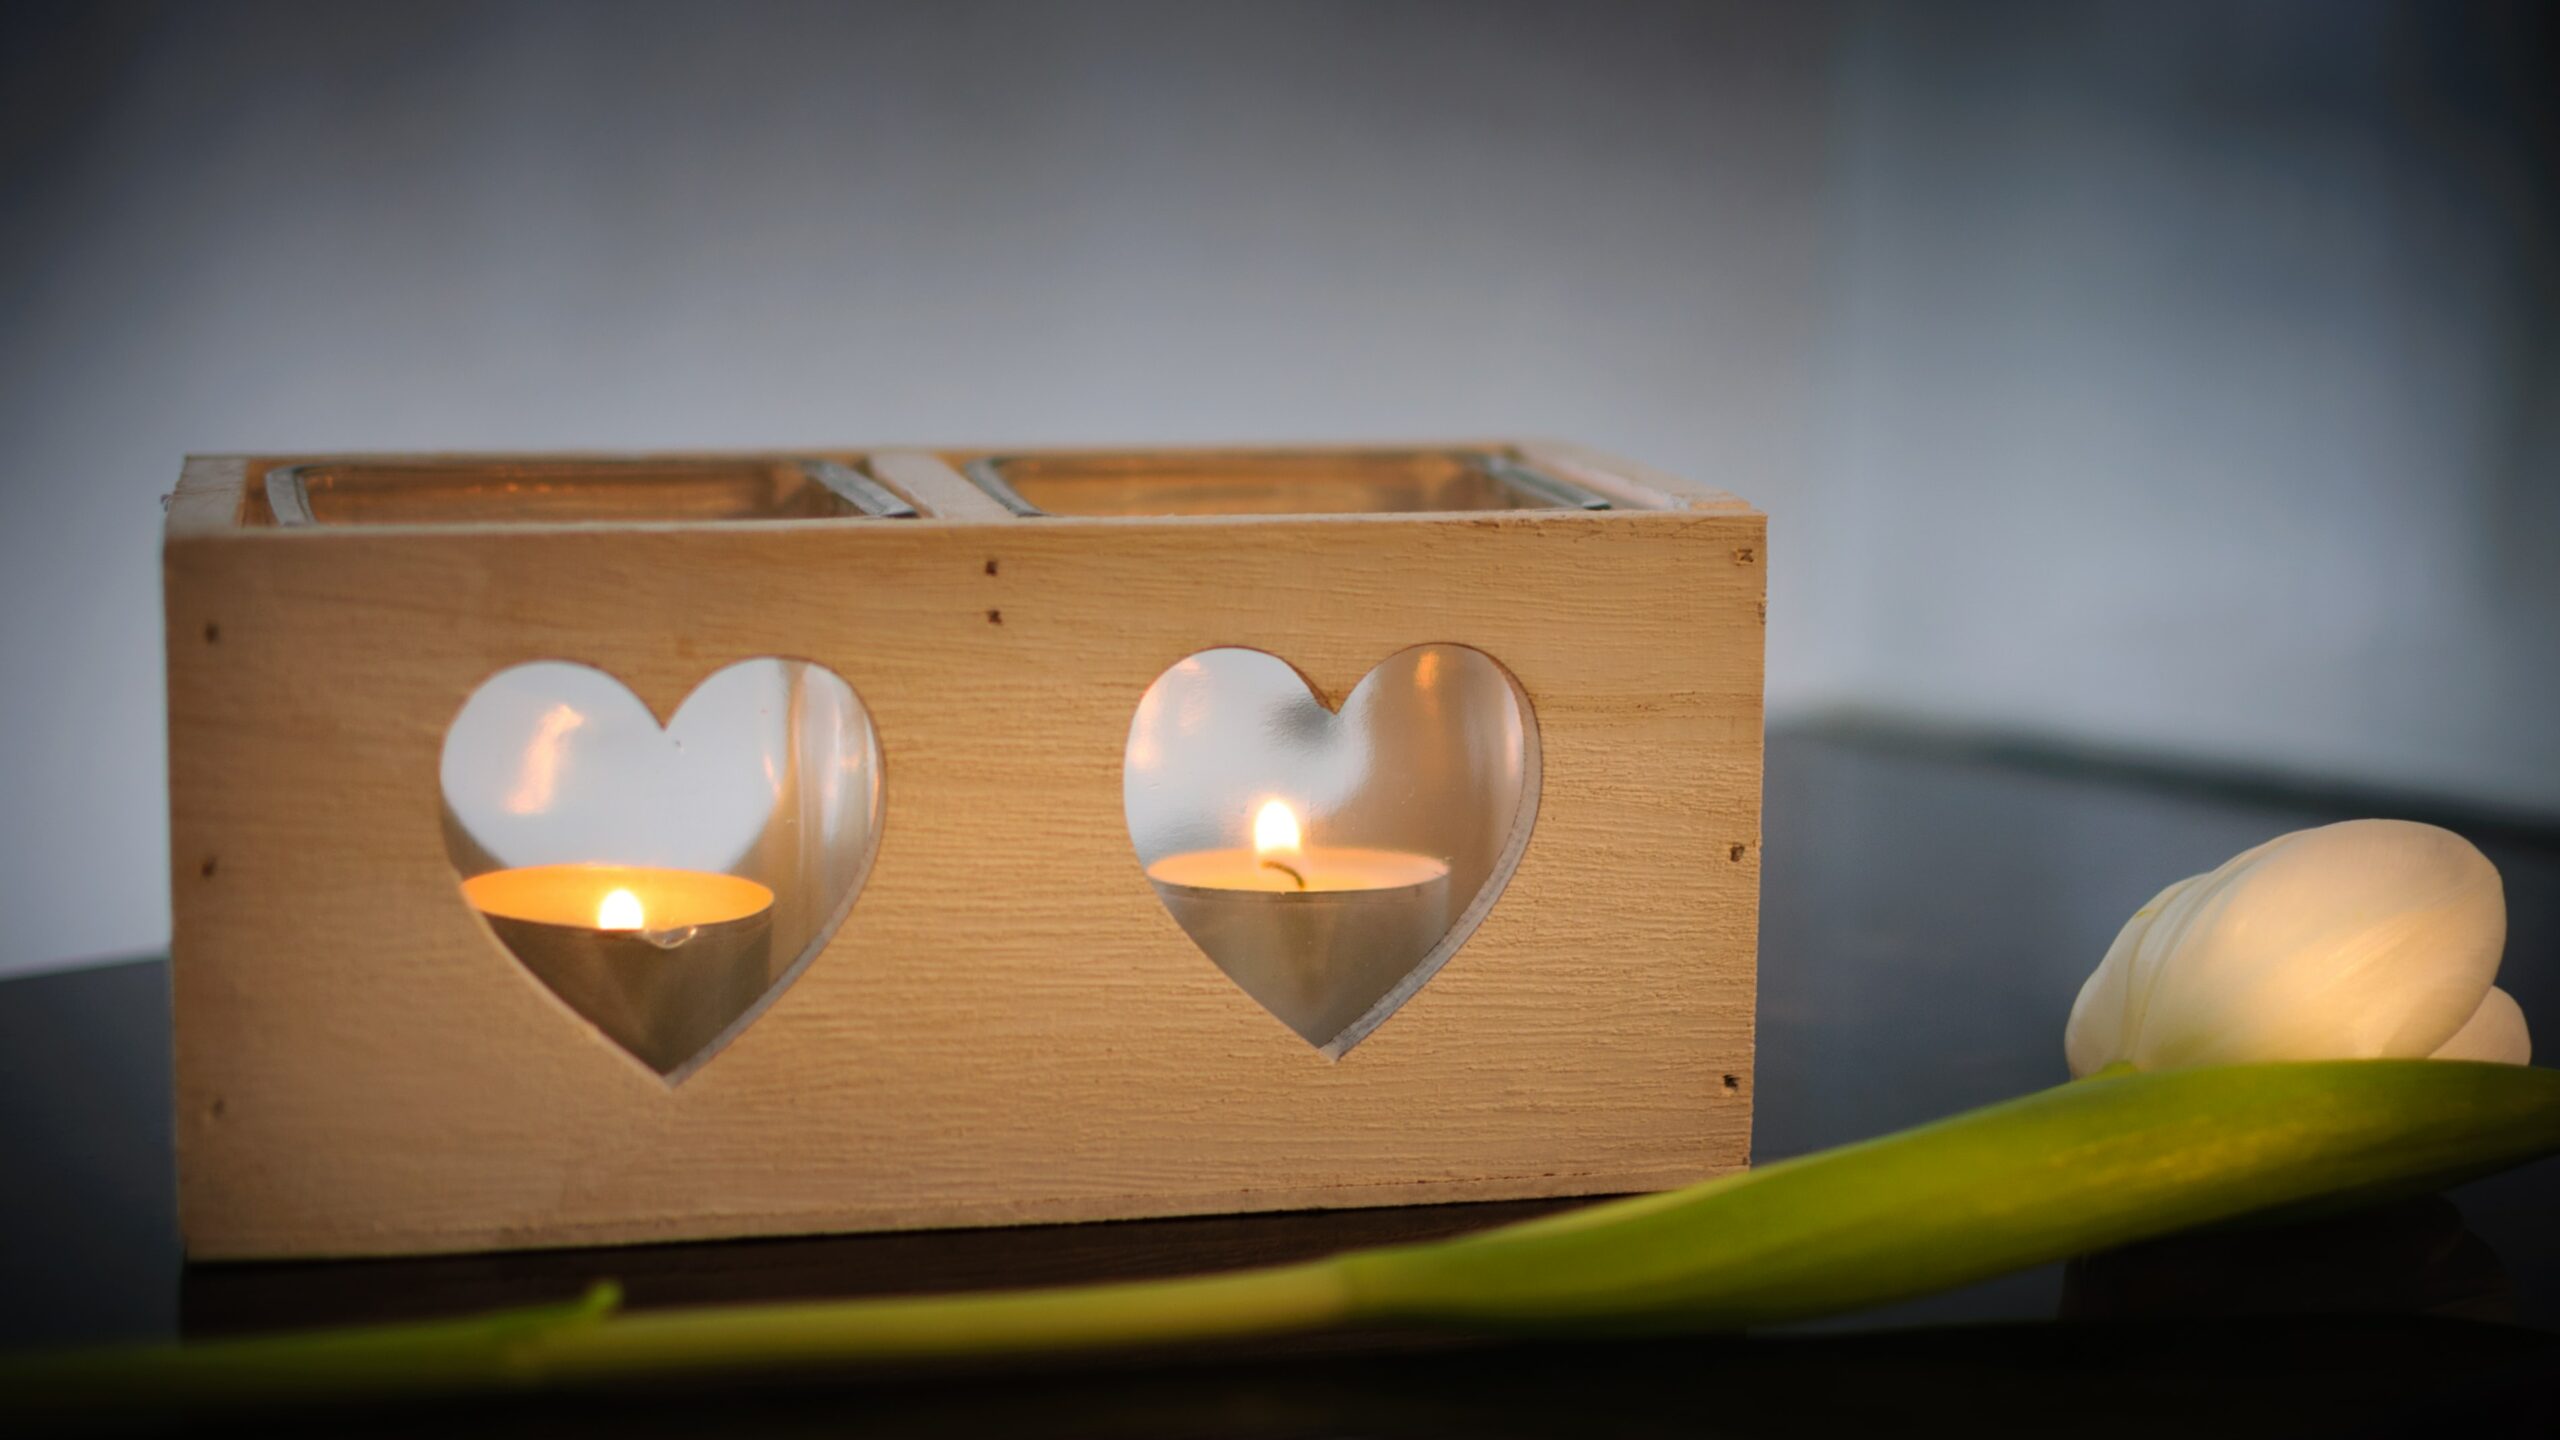 A box with heart-shaped holes and candles burning inside